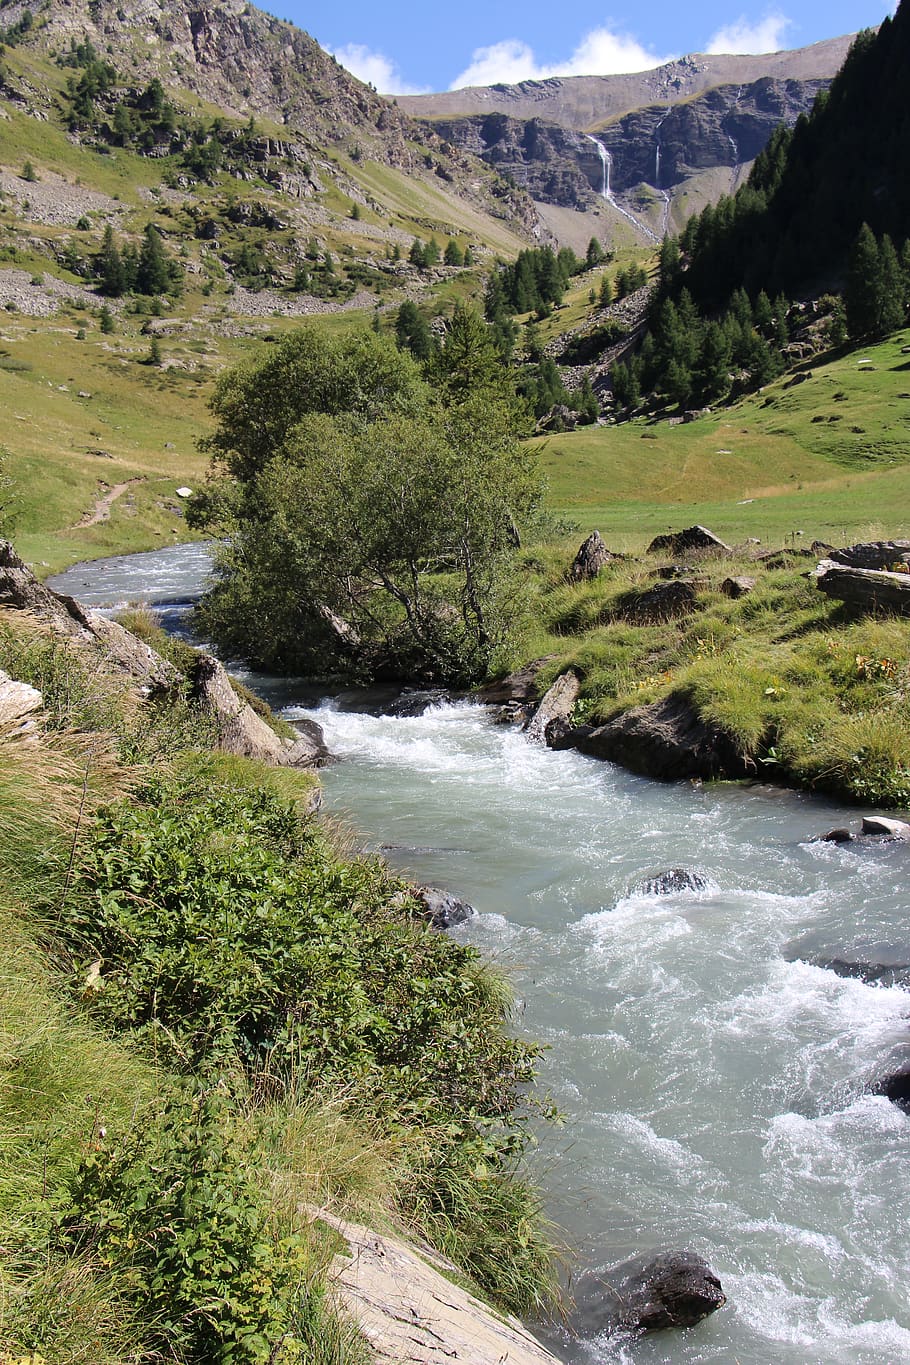 torrent, mountain, hautes alpes, water, beauty in nature, scenics - nature, plant, tree, nature, river